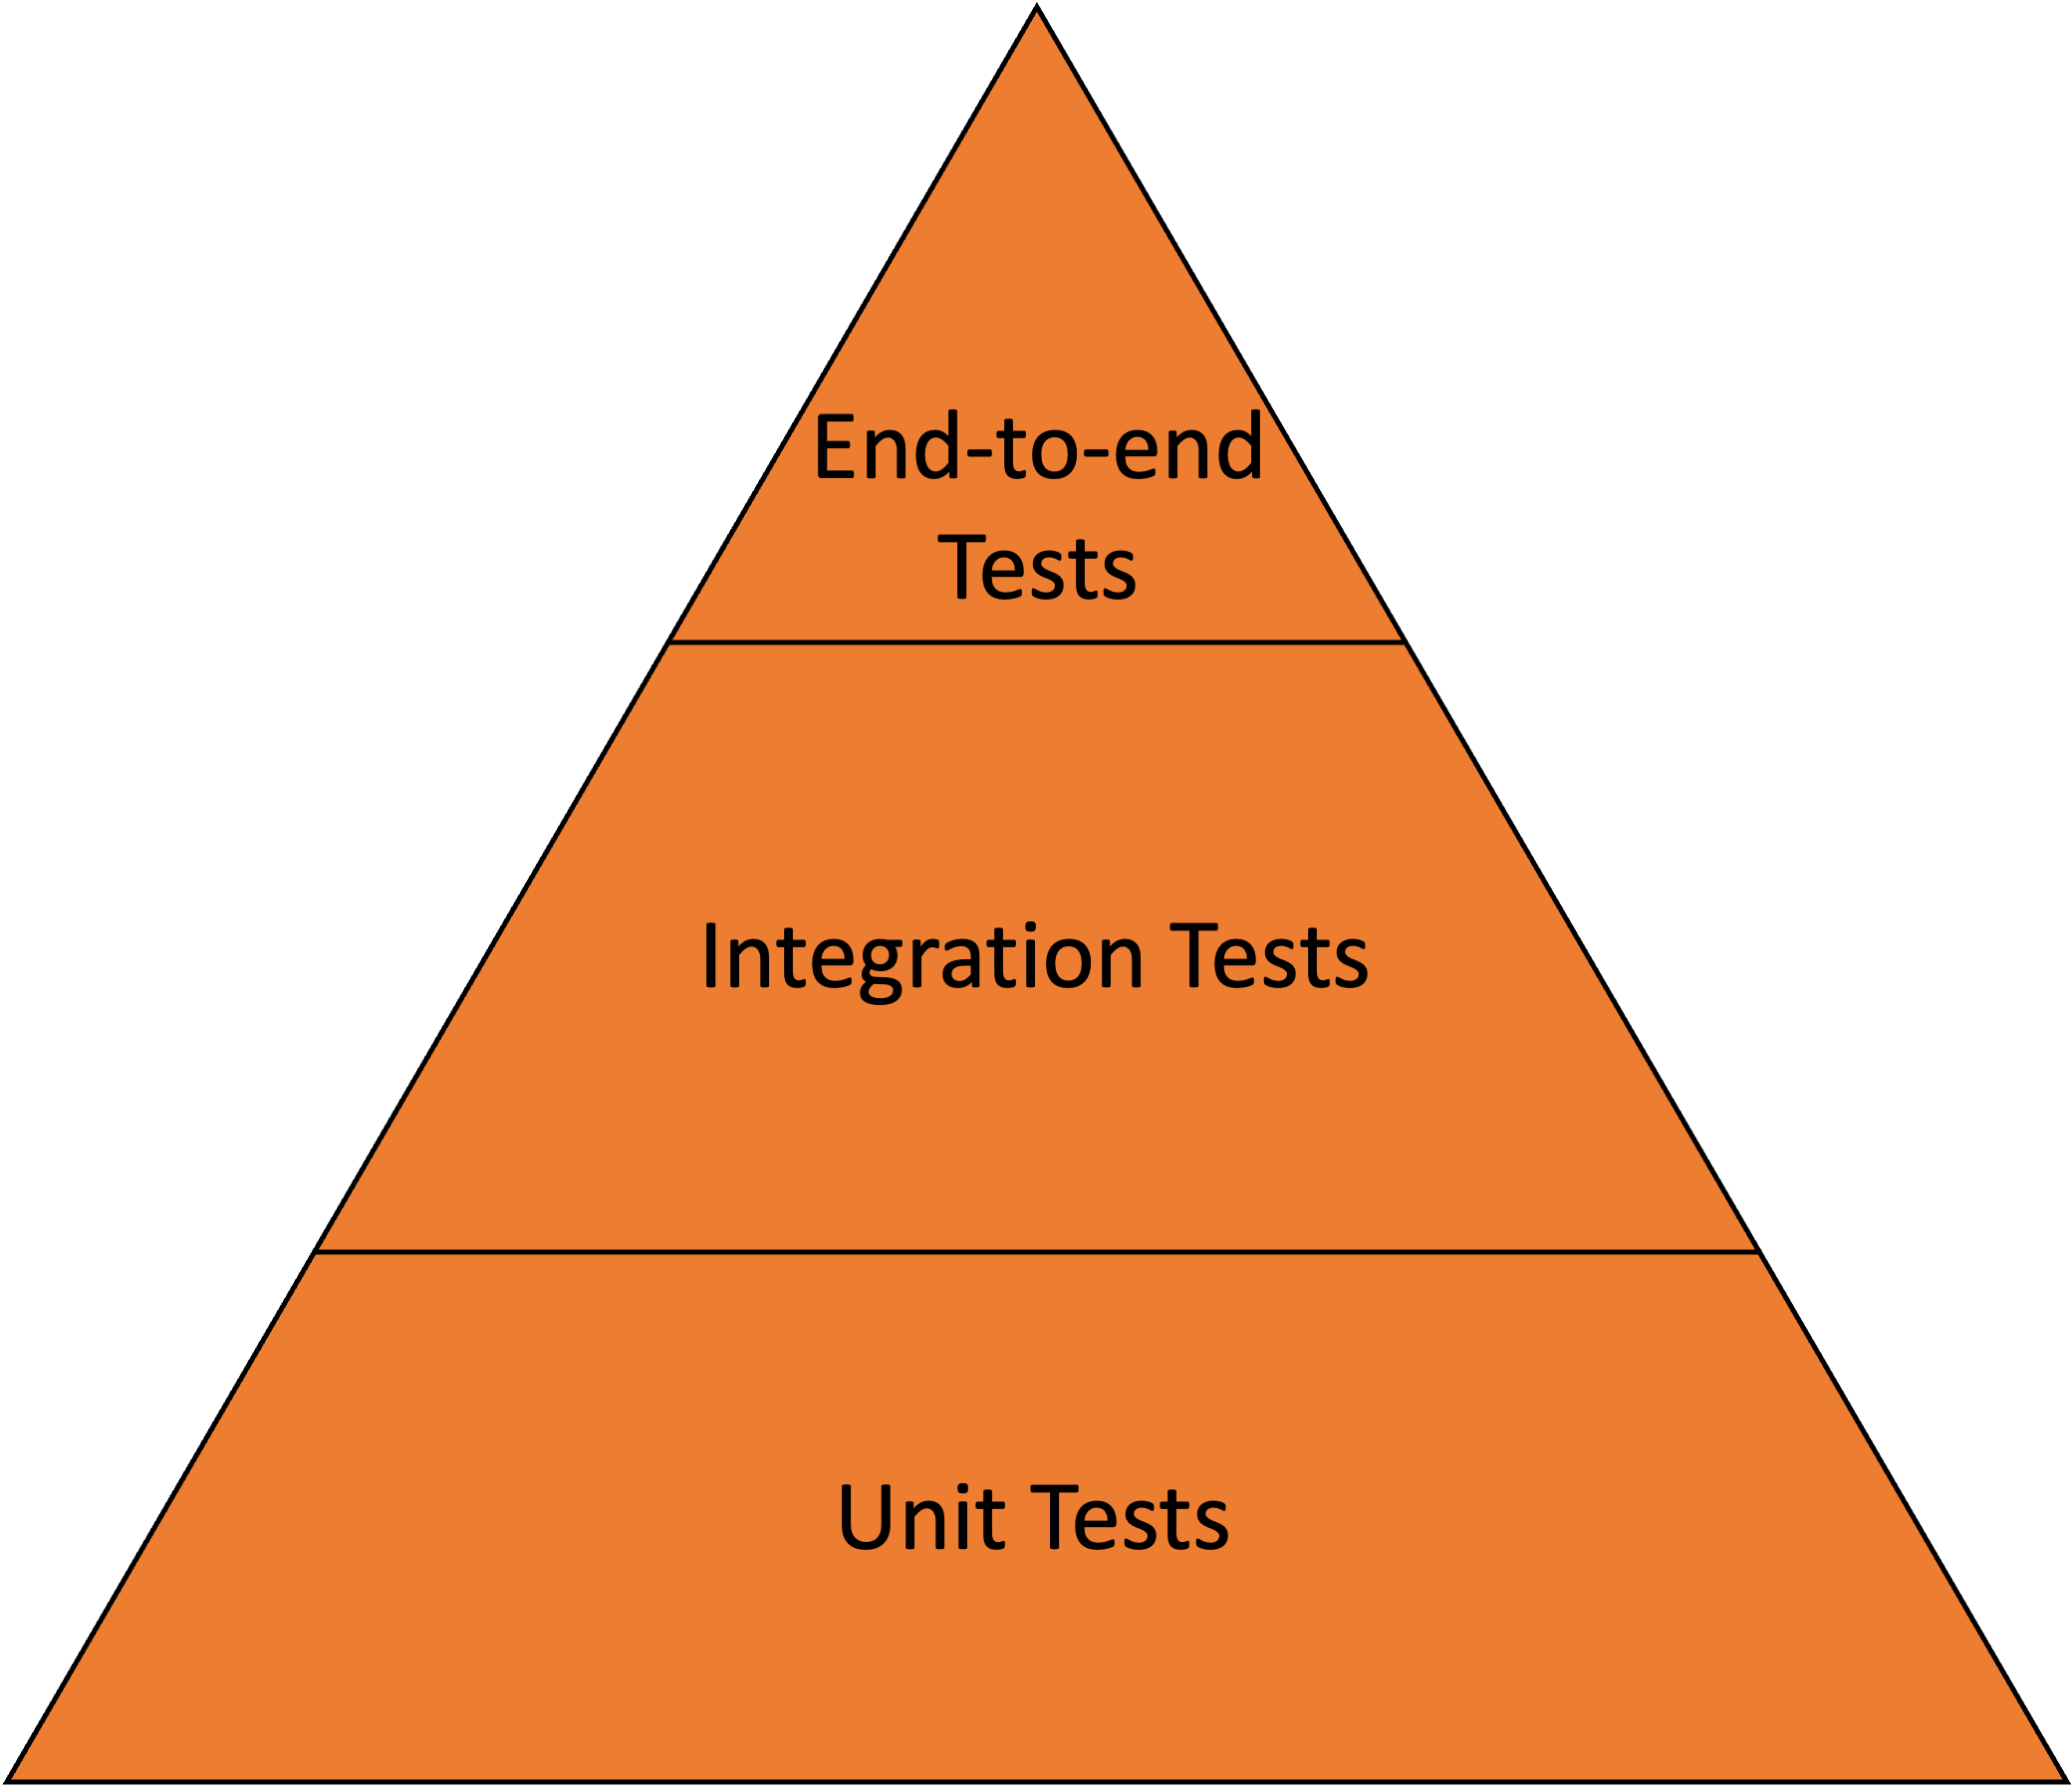 The right testing pyramid